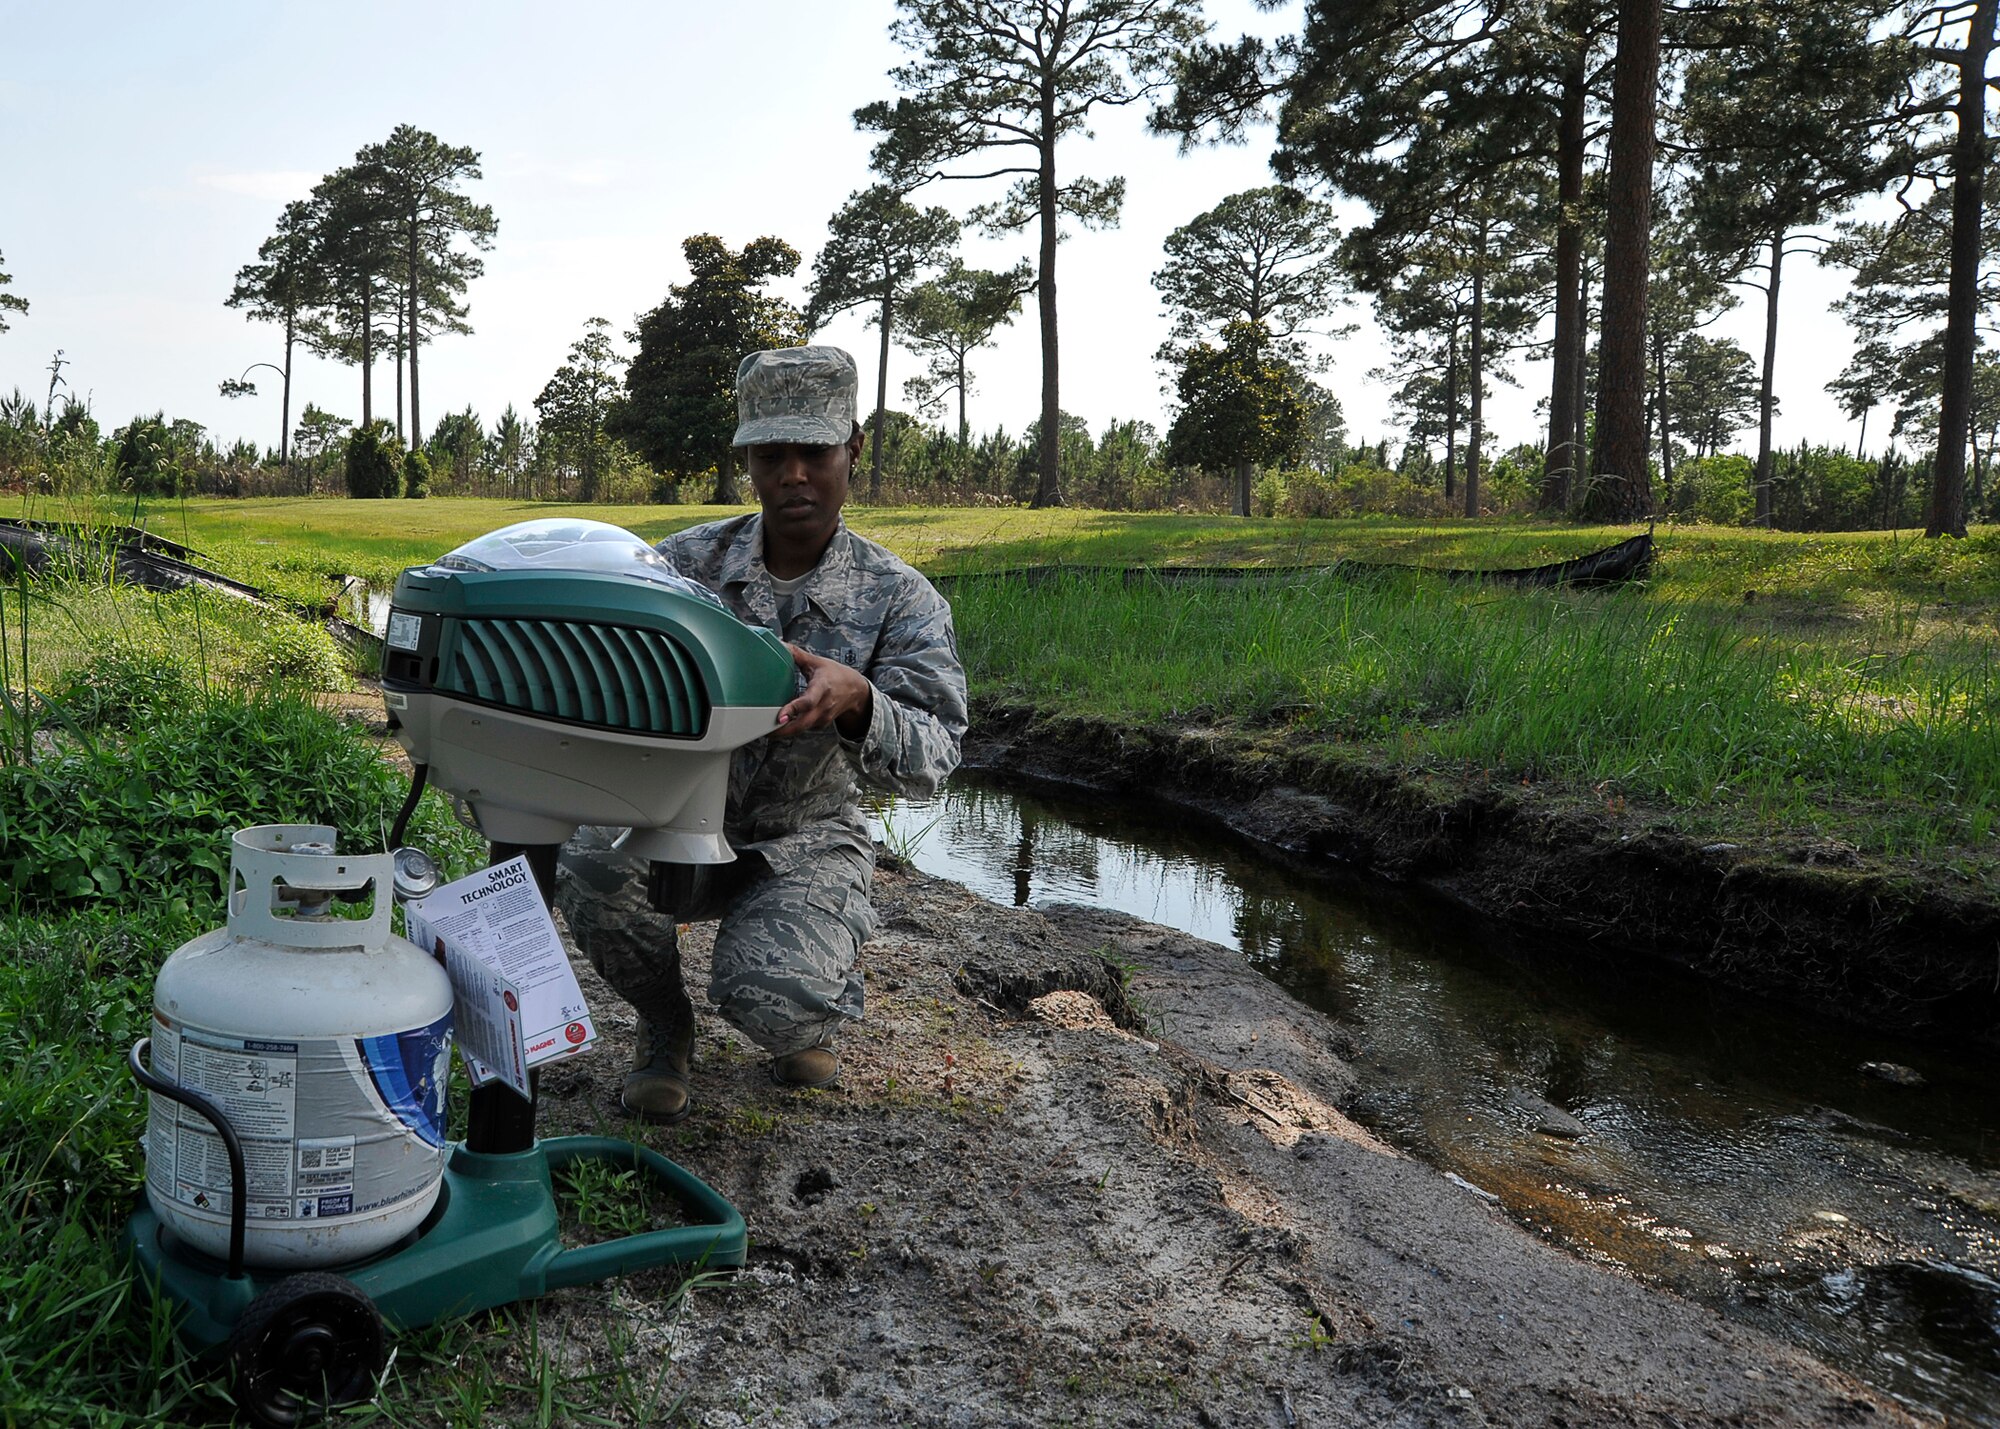 Tech. Sgt. Tanisha Spencer, 325th Aerospace Medical Squadron NCO in charge of community health, prepares a mosquito trap May 20 at the base track. Mosquito traps are left overnight to determine the population and species of mosquitoes in an area. (U.S. Air Force photo by Airman 1st Class Solomon Cook)